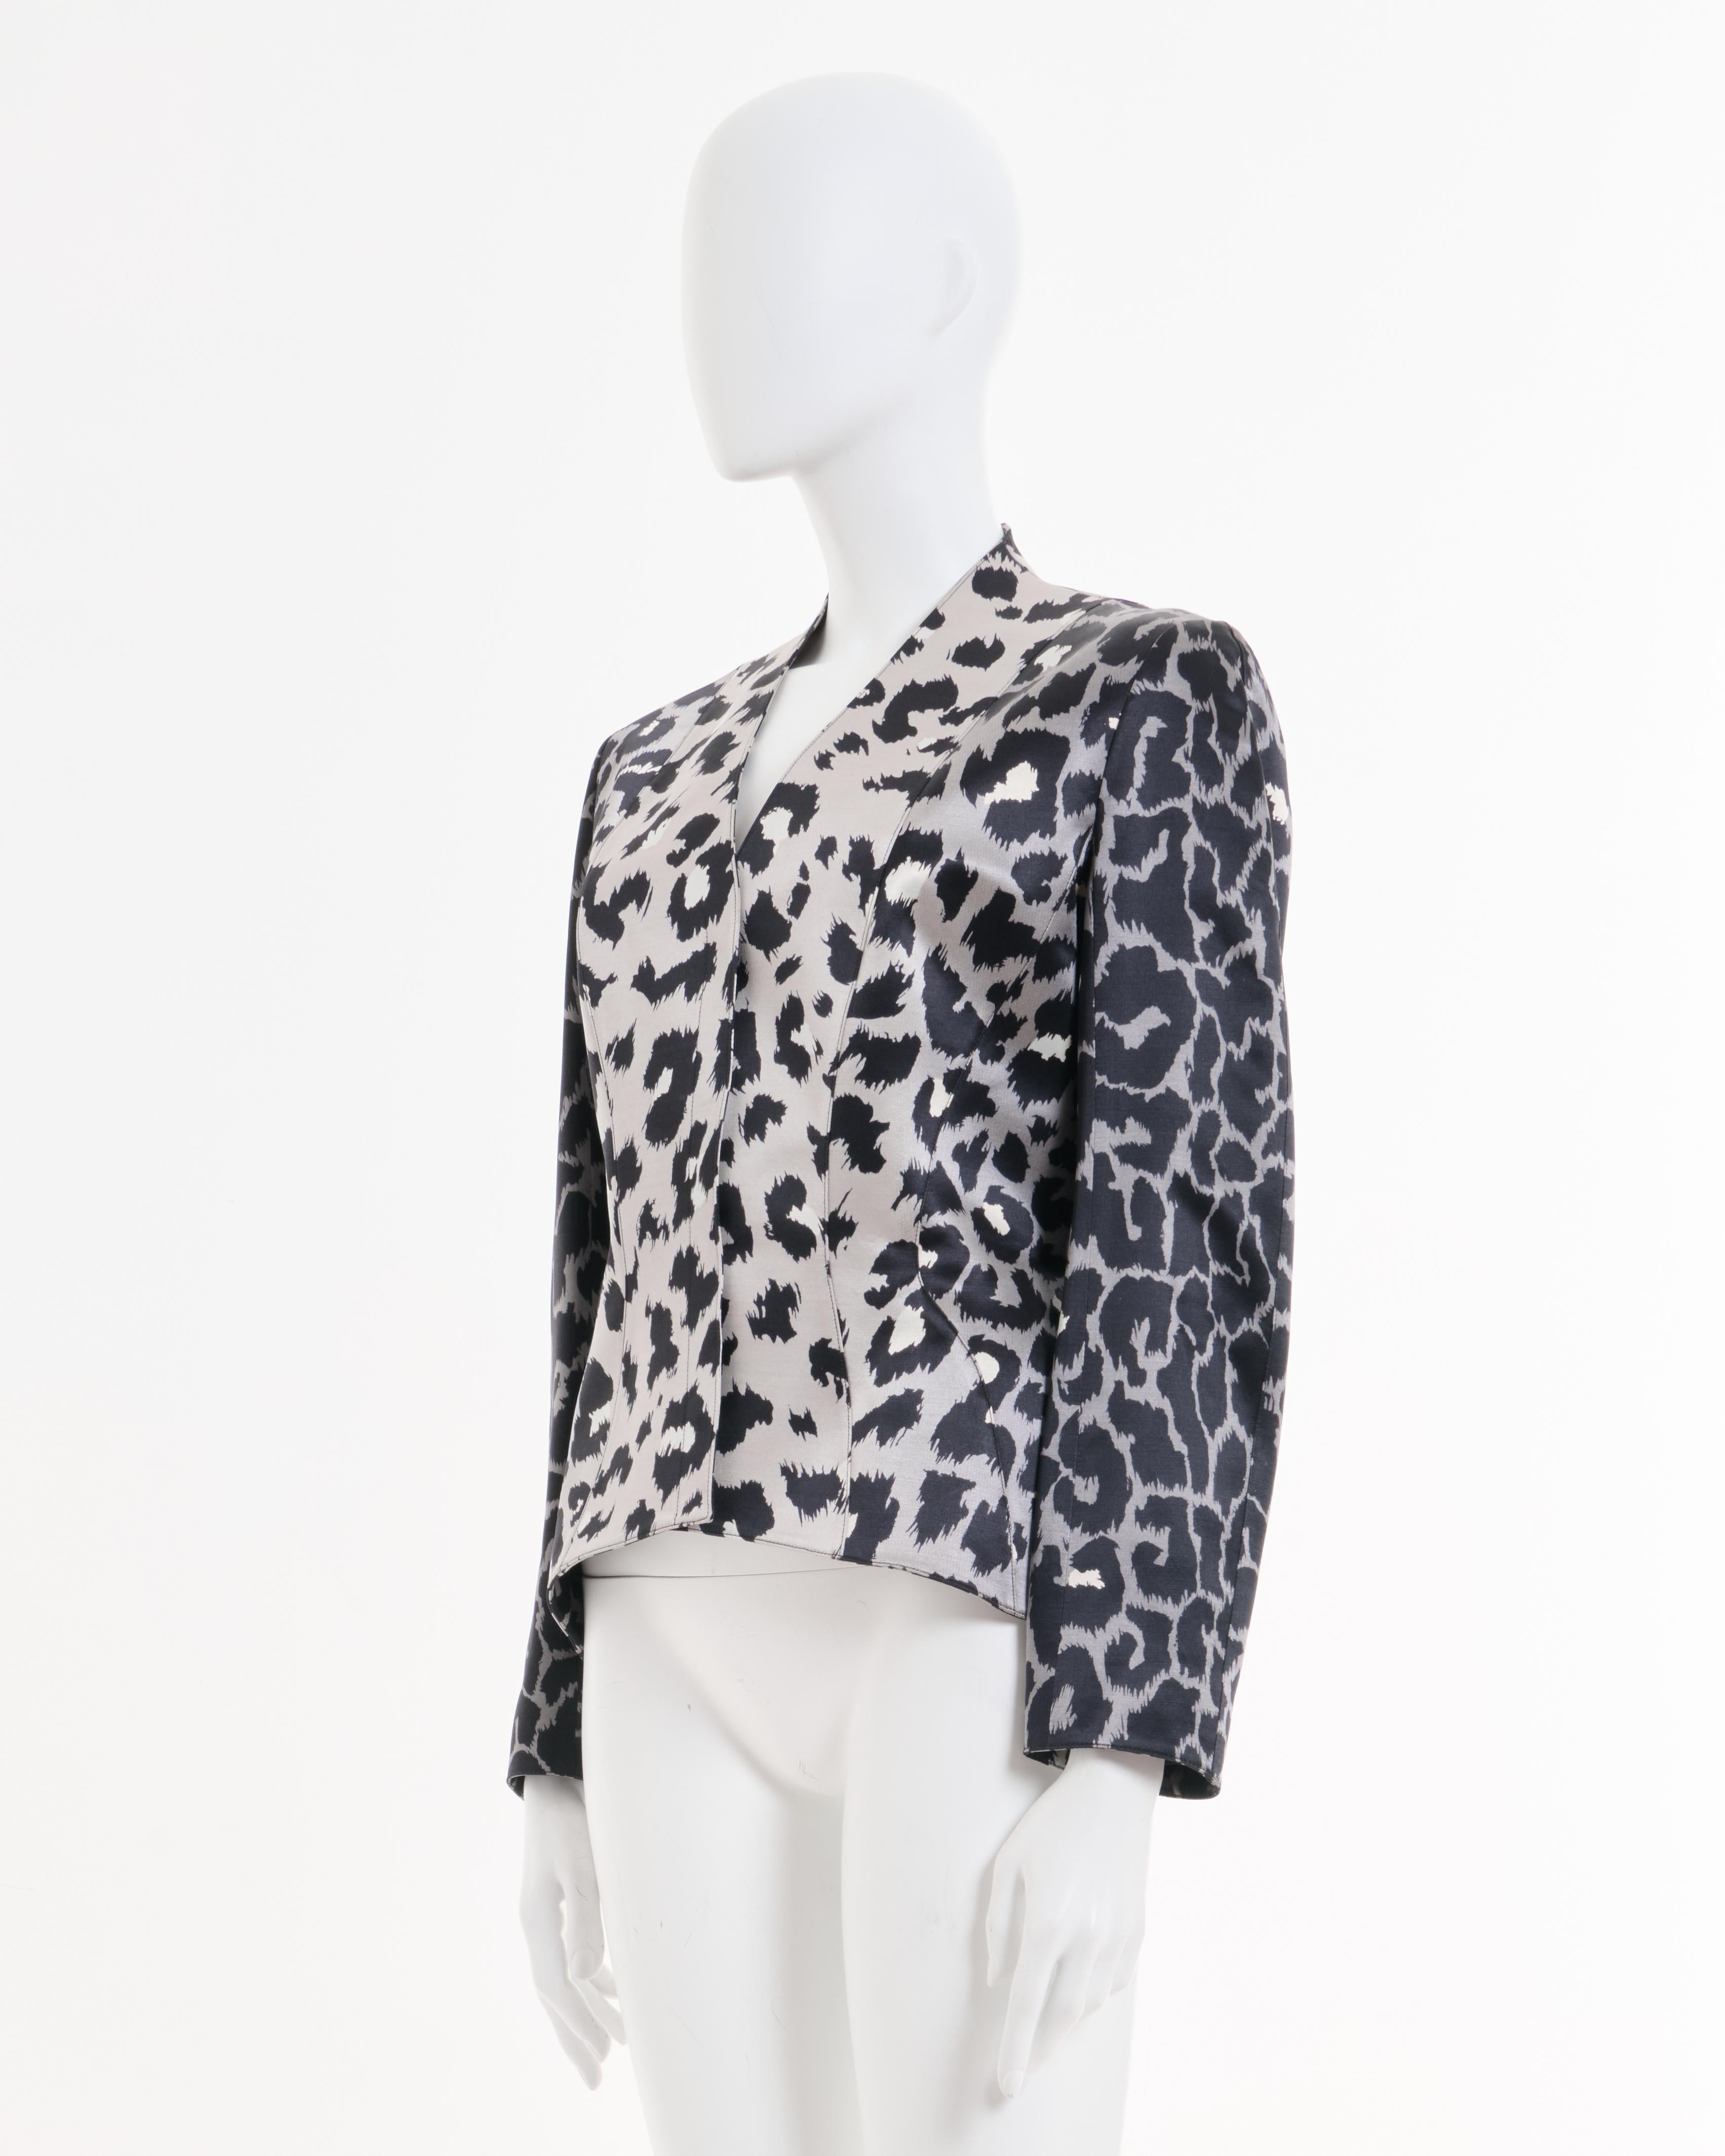 - Thierry Mugler Couture grey silk cheetah jacket
- Sold by Skof.Archive 
- Shoulder pads 
- Hidden snap closure along the front
- Fitted to the body 
- Size: FR 38 - EN 42 - UK 10 - US 6 (EU) 
- Fabric: 100% Silk 
- Made in France 
- Mint